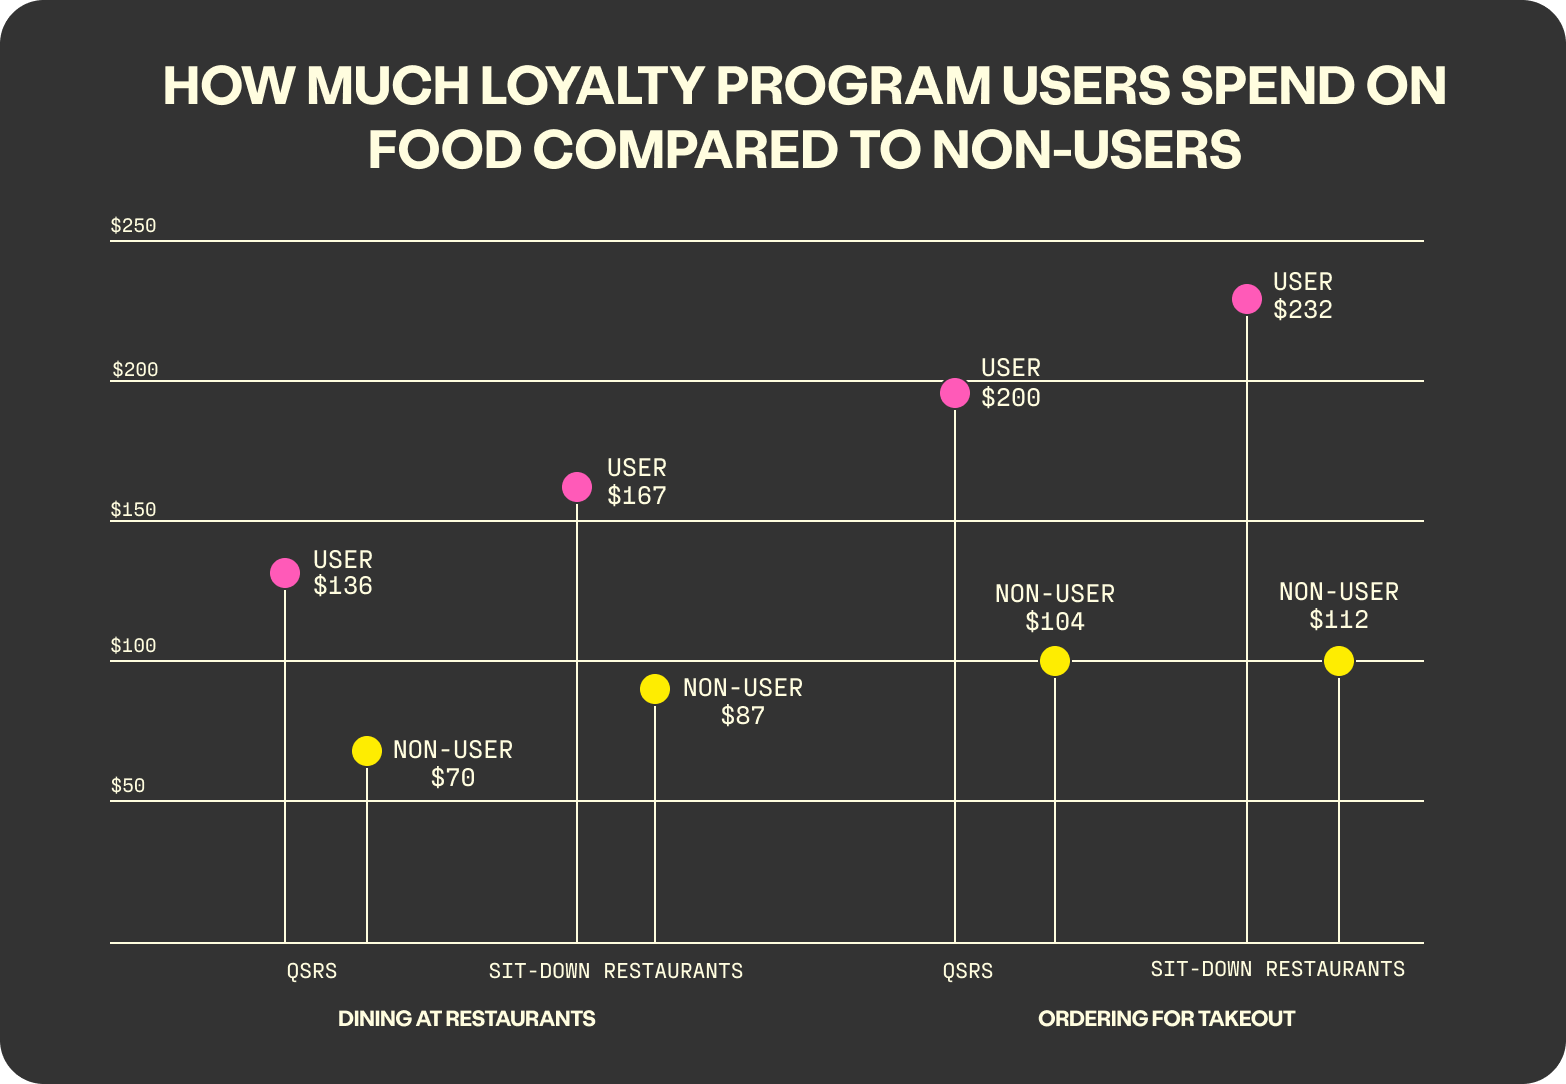 Diners apart of loyalty programs become repeat customers who spend more.